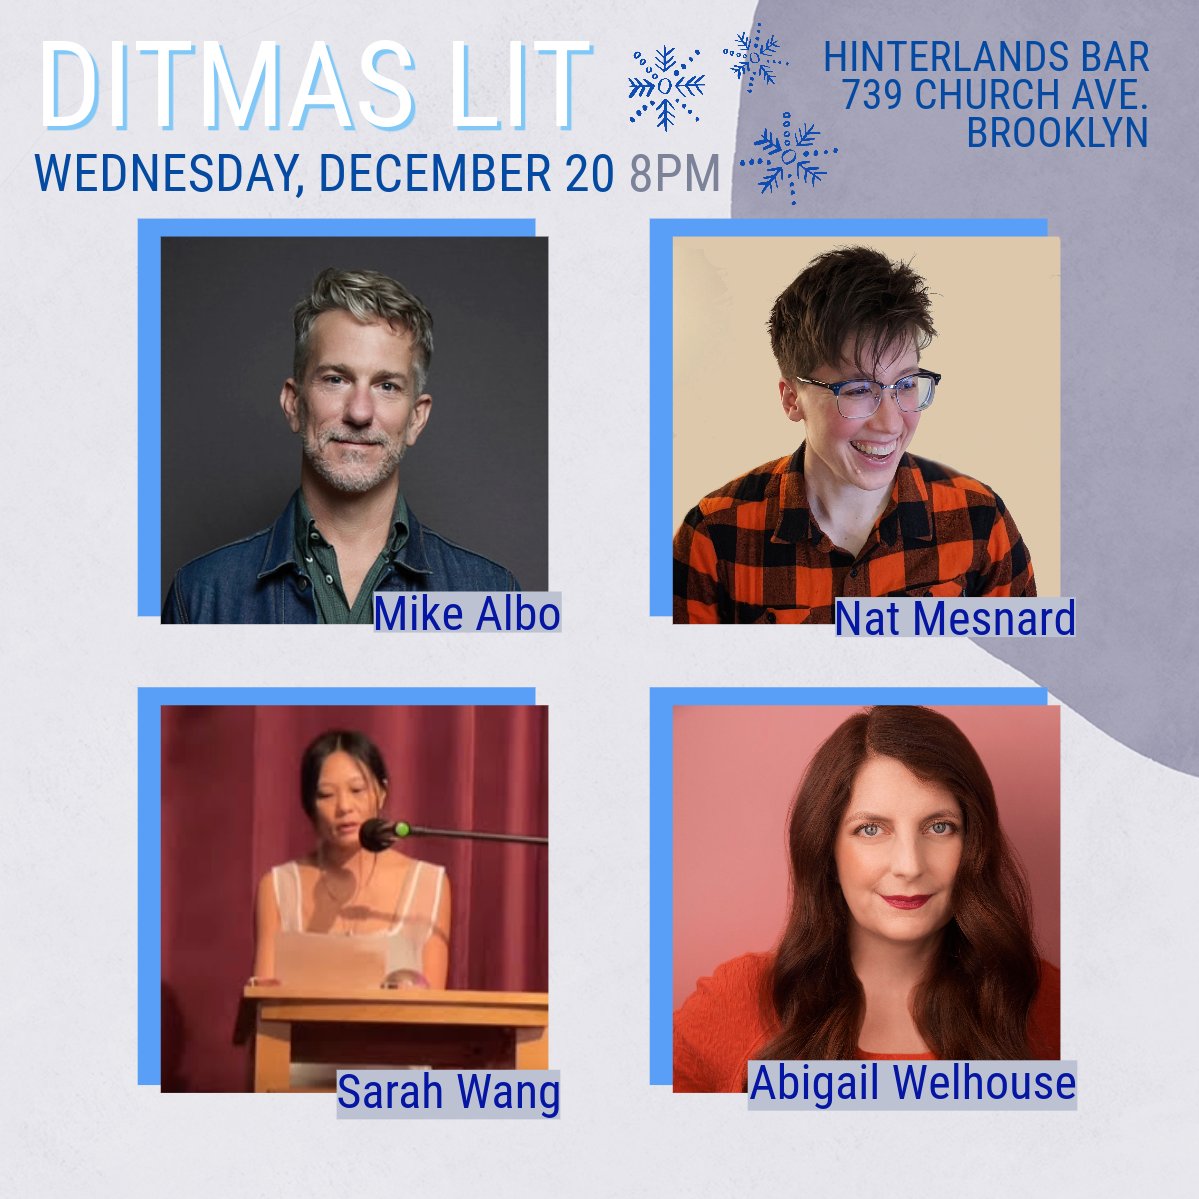 We are so excited for our Dec. 20th show! Not only do we have an incredible lineup with @albomike @natmesnard @sarah_wwang & @welhouse, but it's also our 7th (!!!) anniversary. Come celebrate with us! ❄️⛄️